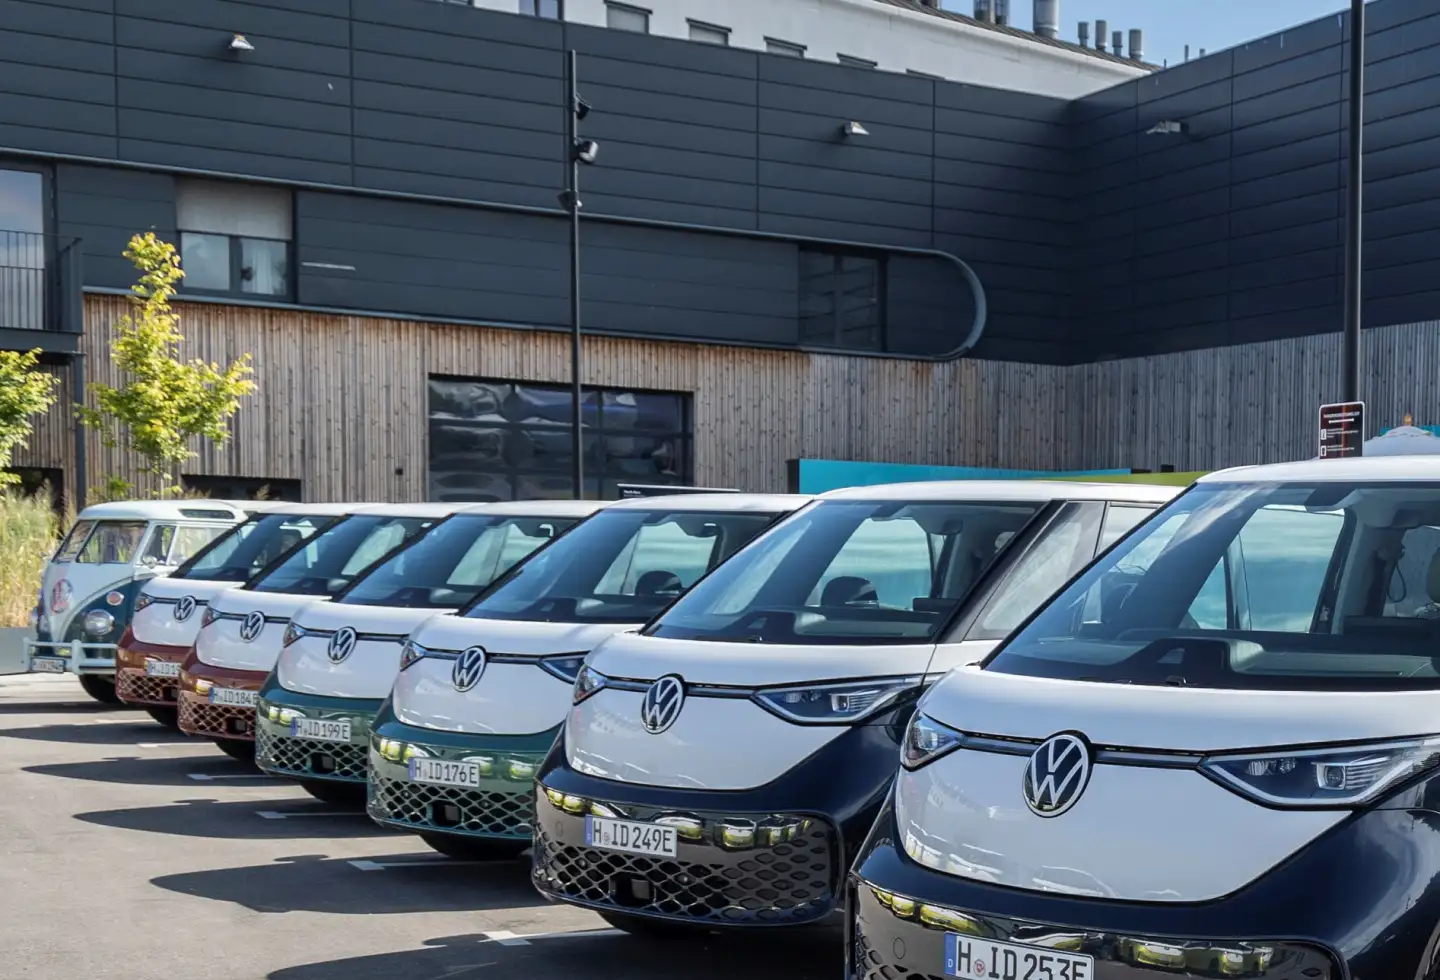 Image: Volkswagen Sustainability with its 'regenerate+' Strategy